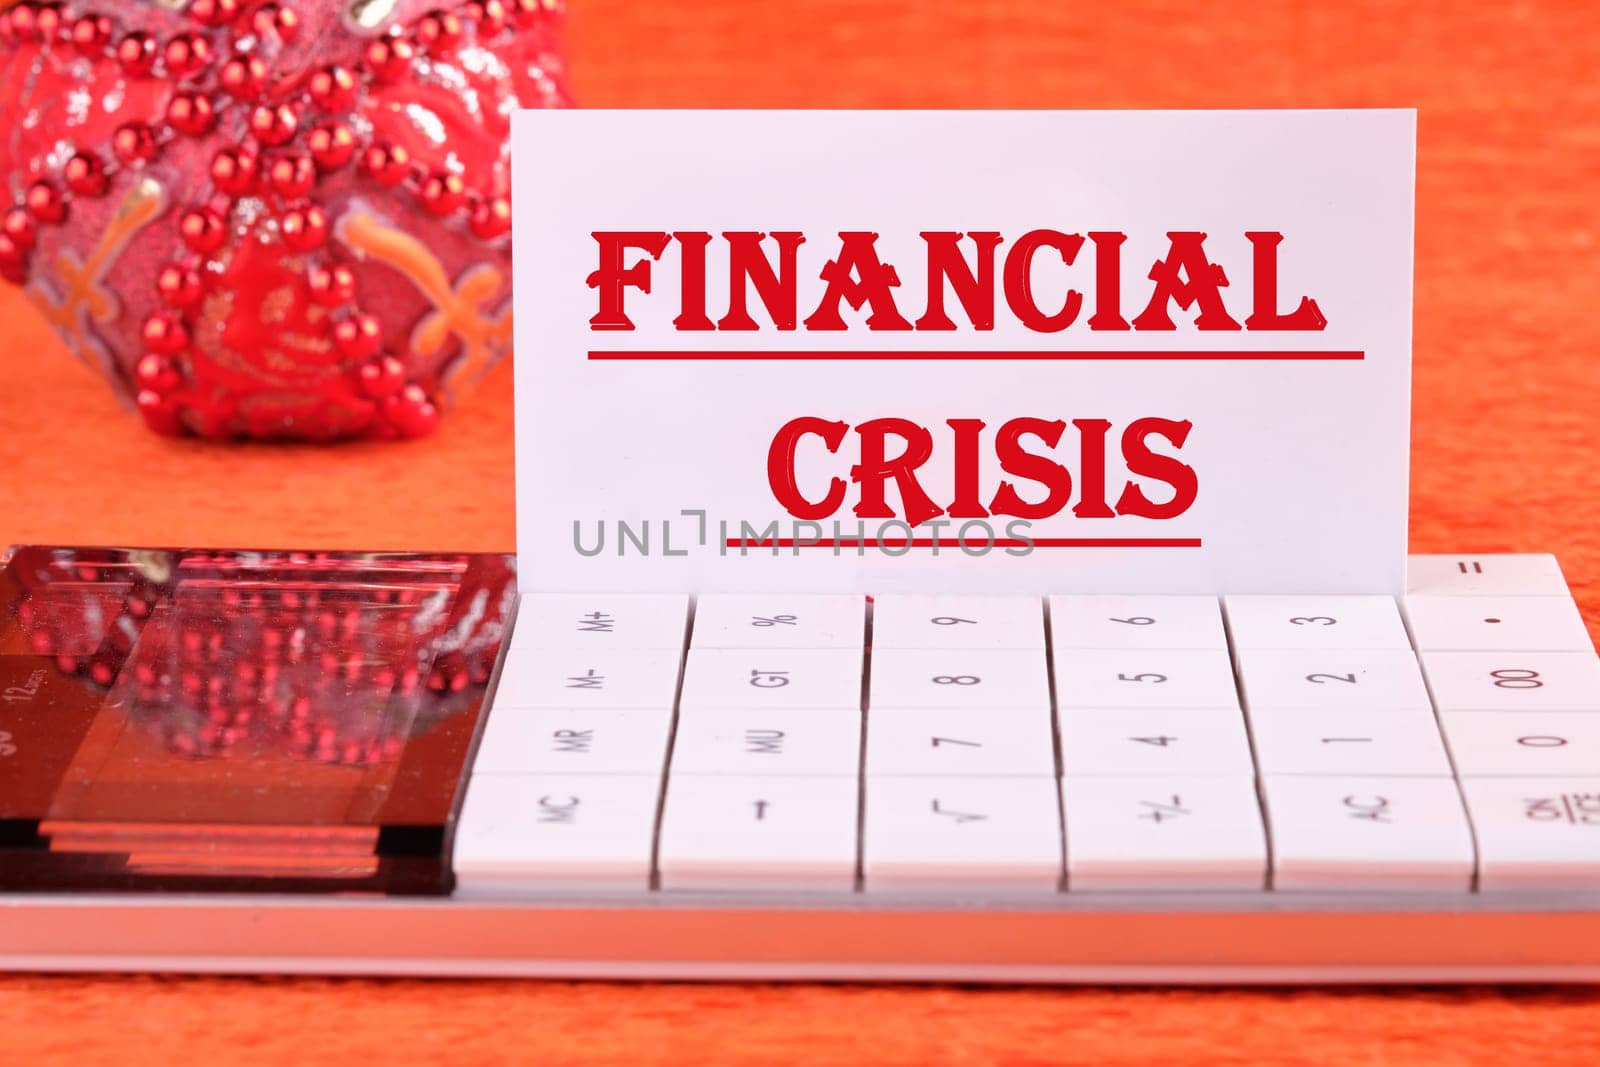 FINANCIAL CRISIS text written on a white business card on a calculator on an orange background